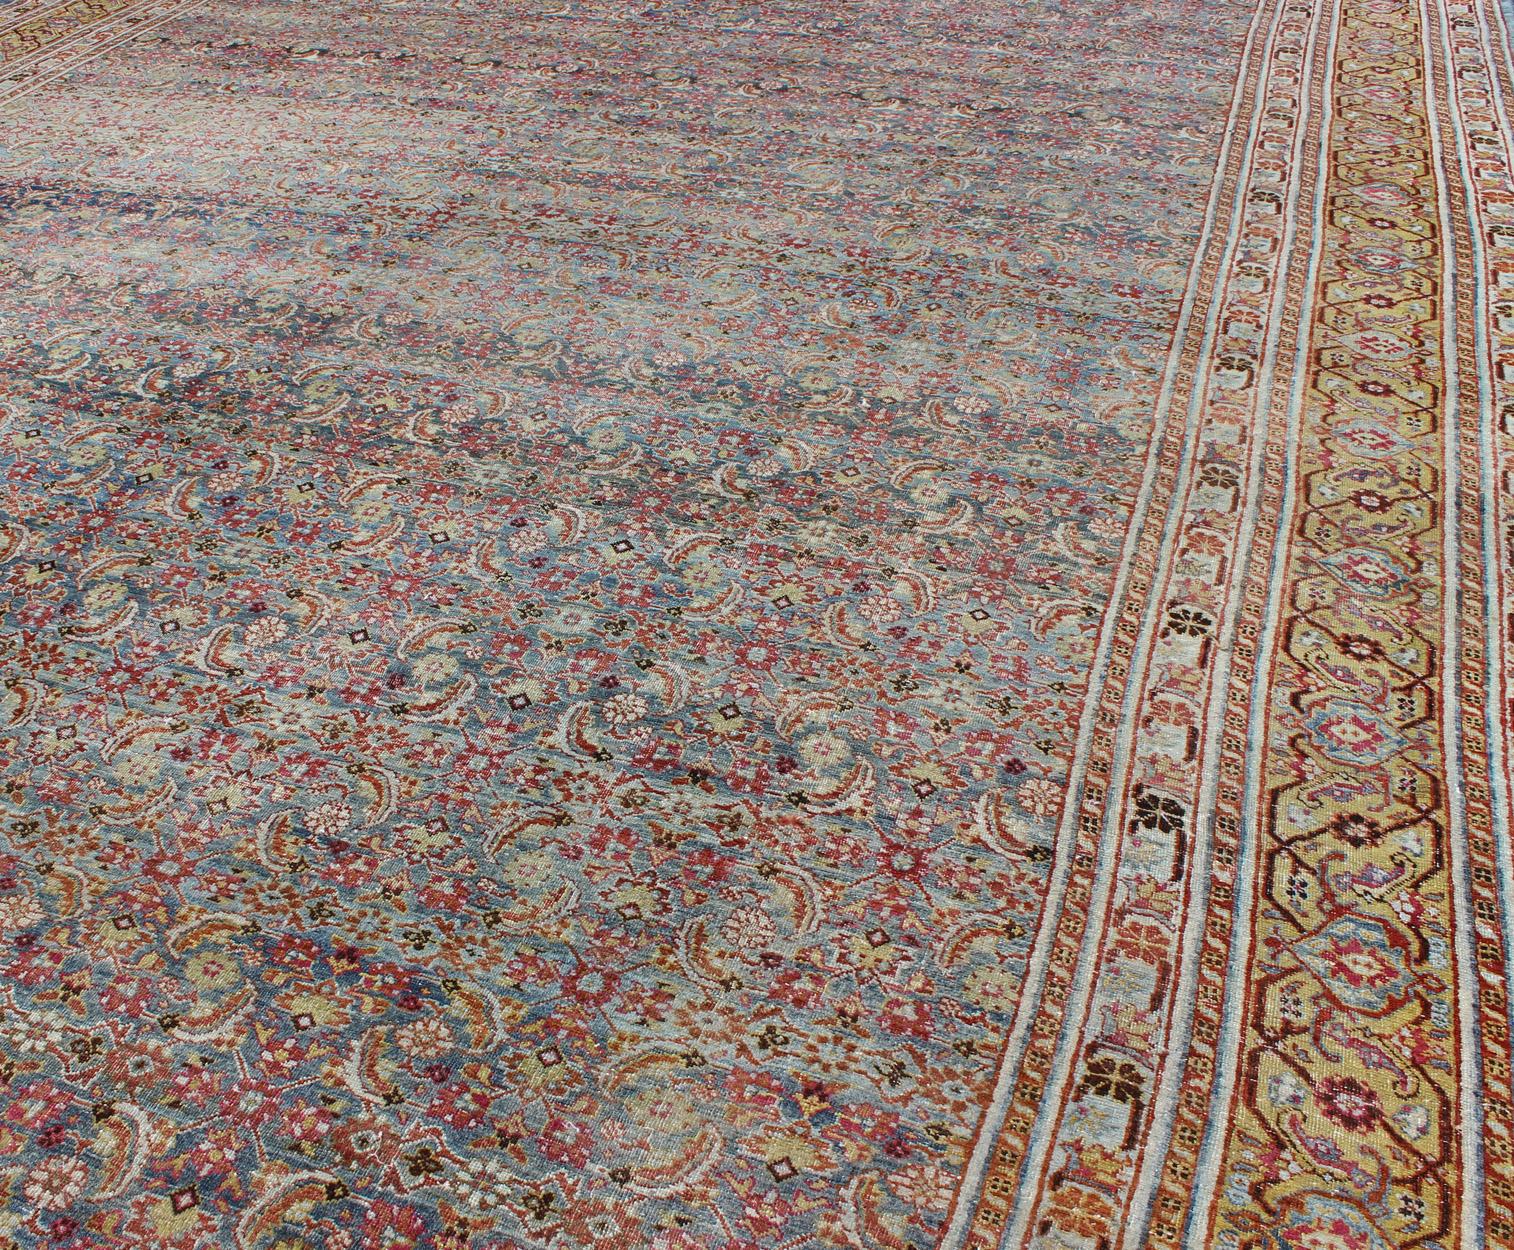 Large Antique Persian Tabriz Rug with Herati Design in Blue tones and Gold For Sale 3